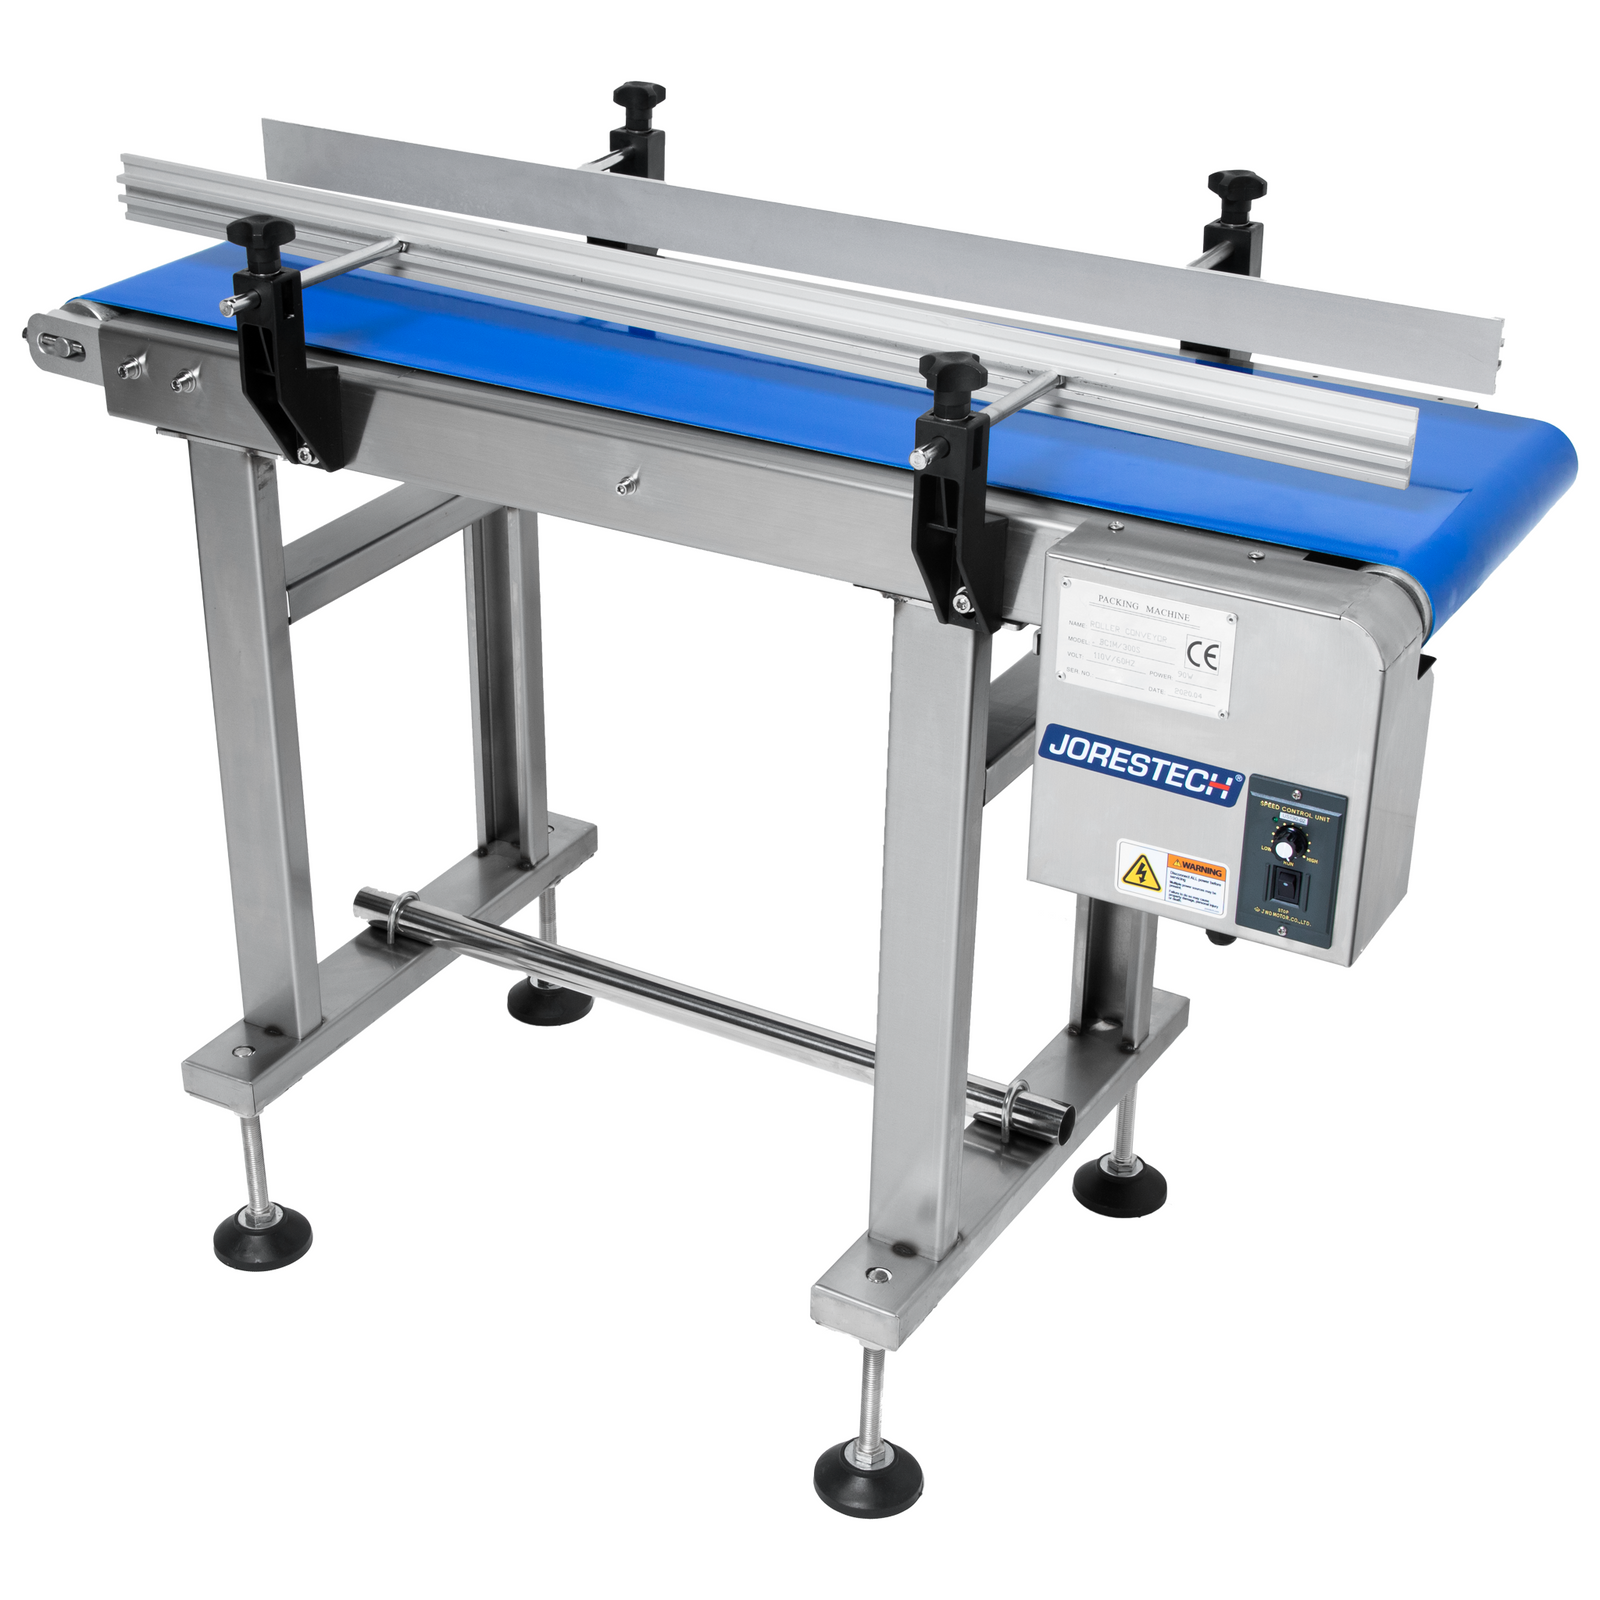 motorized conveyor with steel frame and blue belt that features side guard rails.